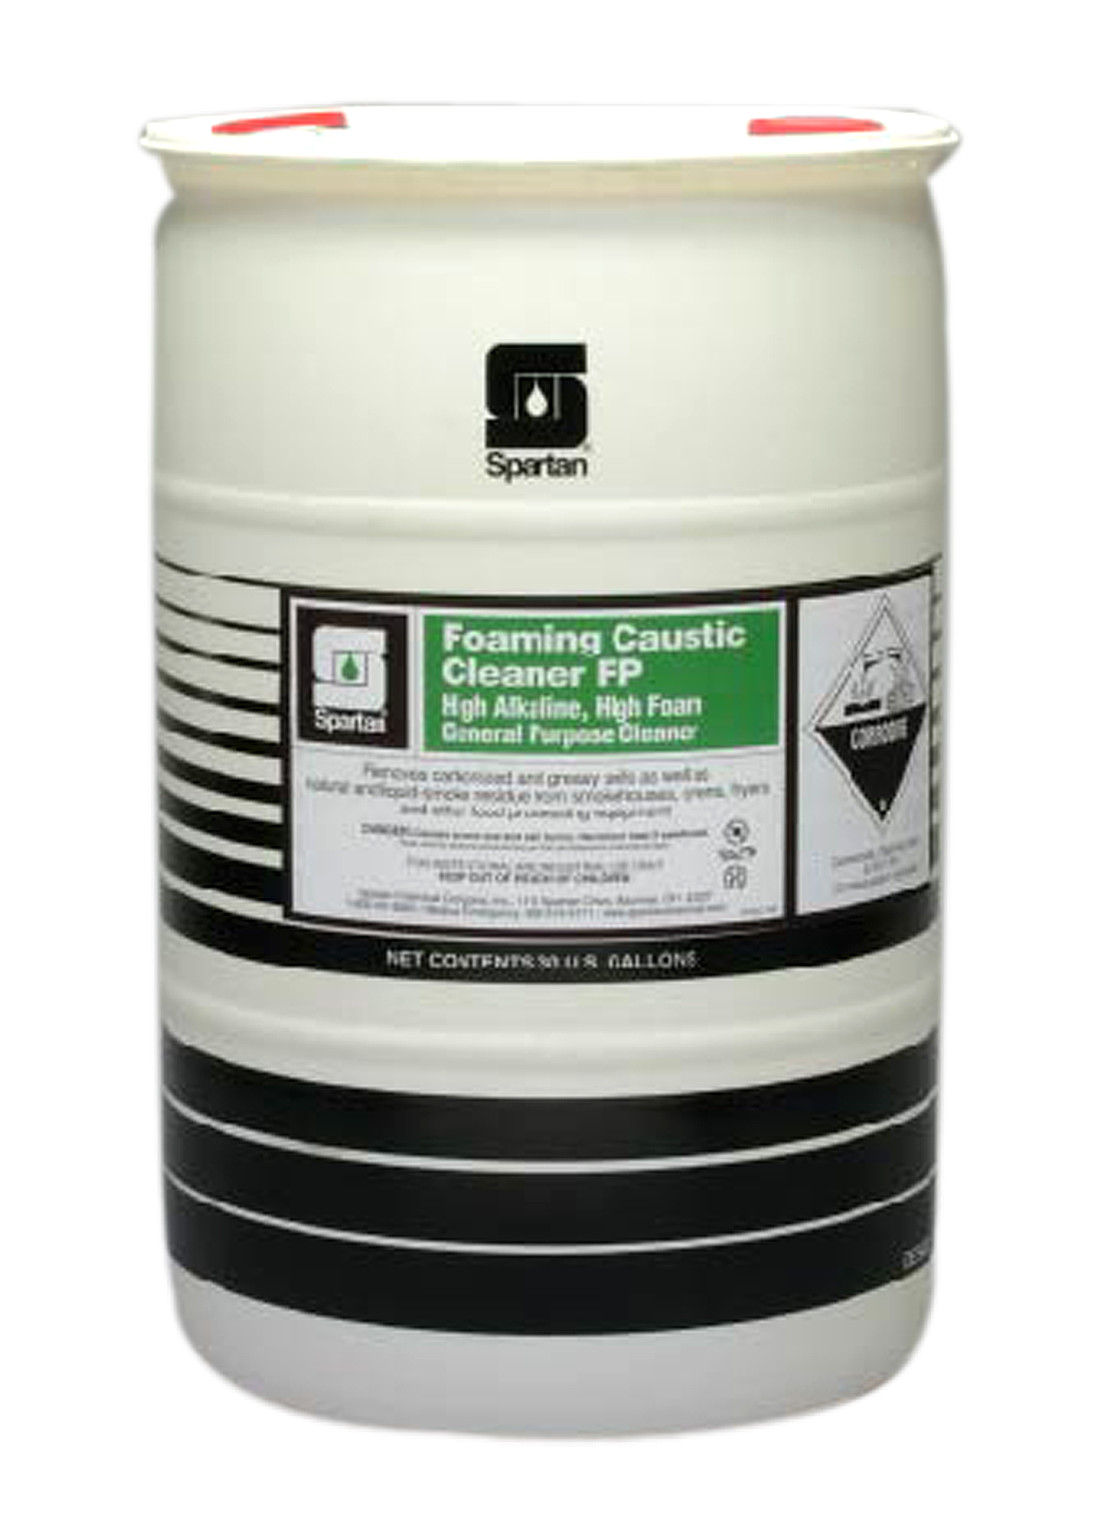 Spartan Chemical Company Foaming Caustic Cleaner FP, 30 GAL DRUM